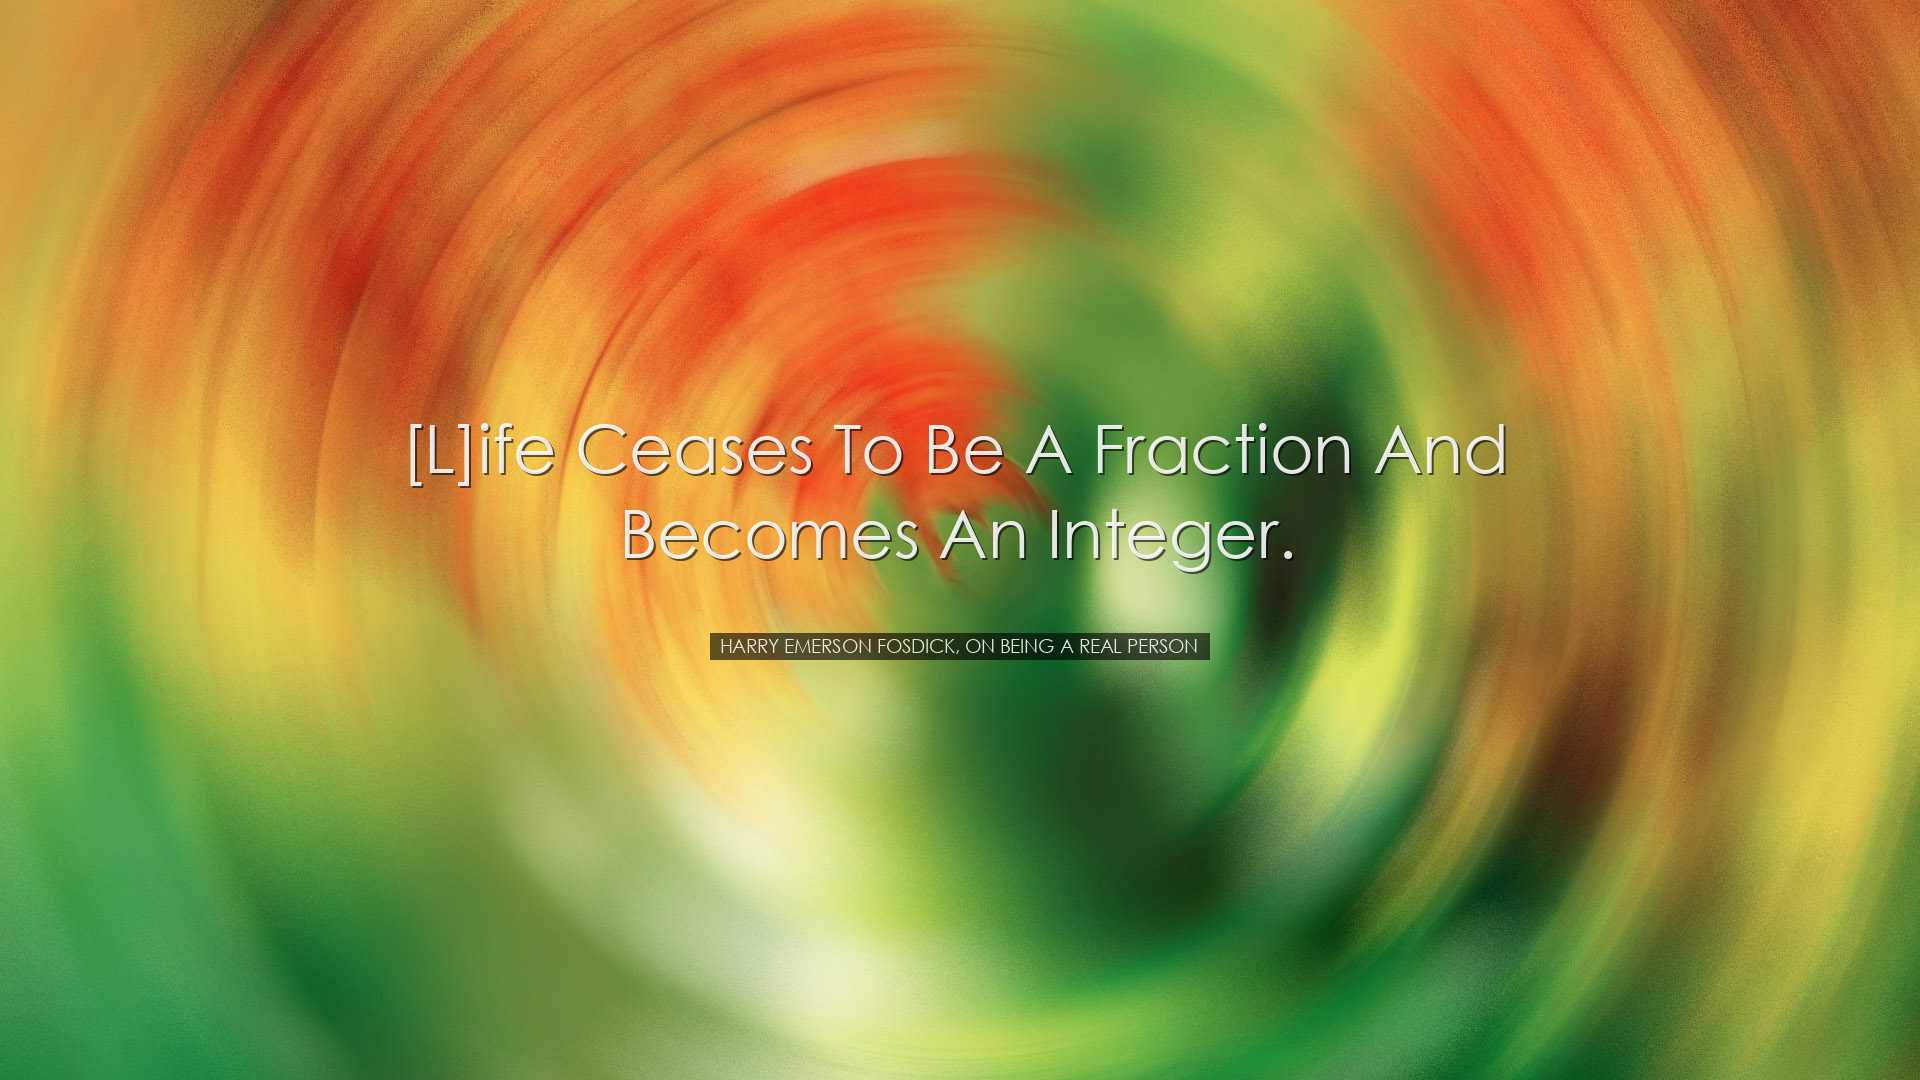 [L]ife ceases to be a fraction and becomes an integer. - Harry Eme